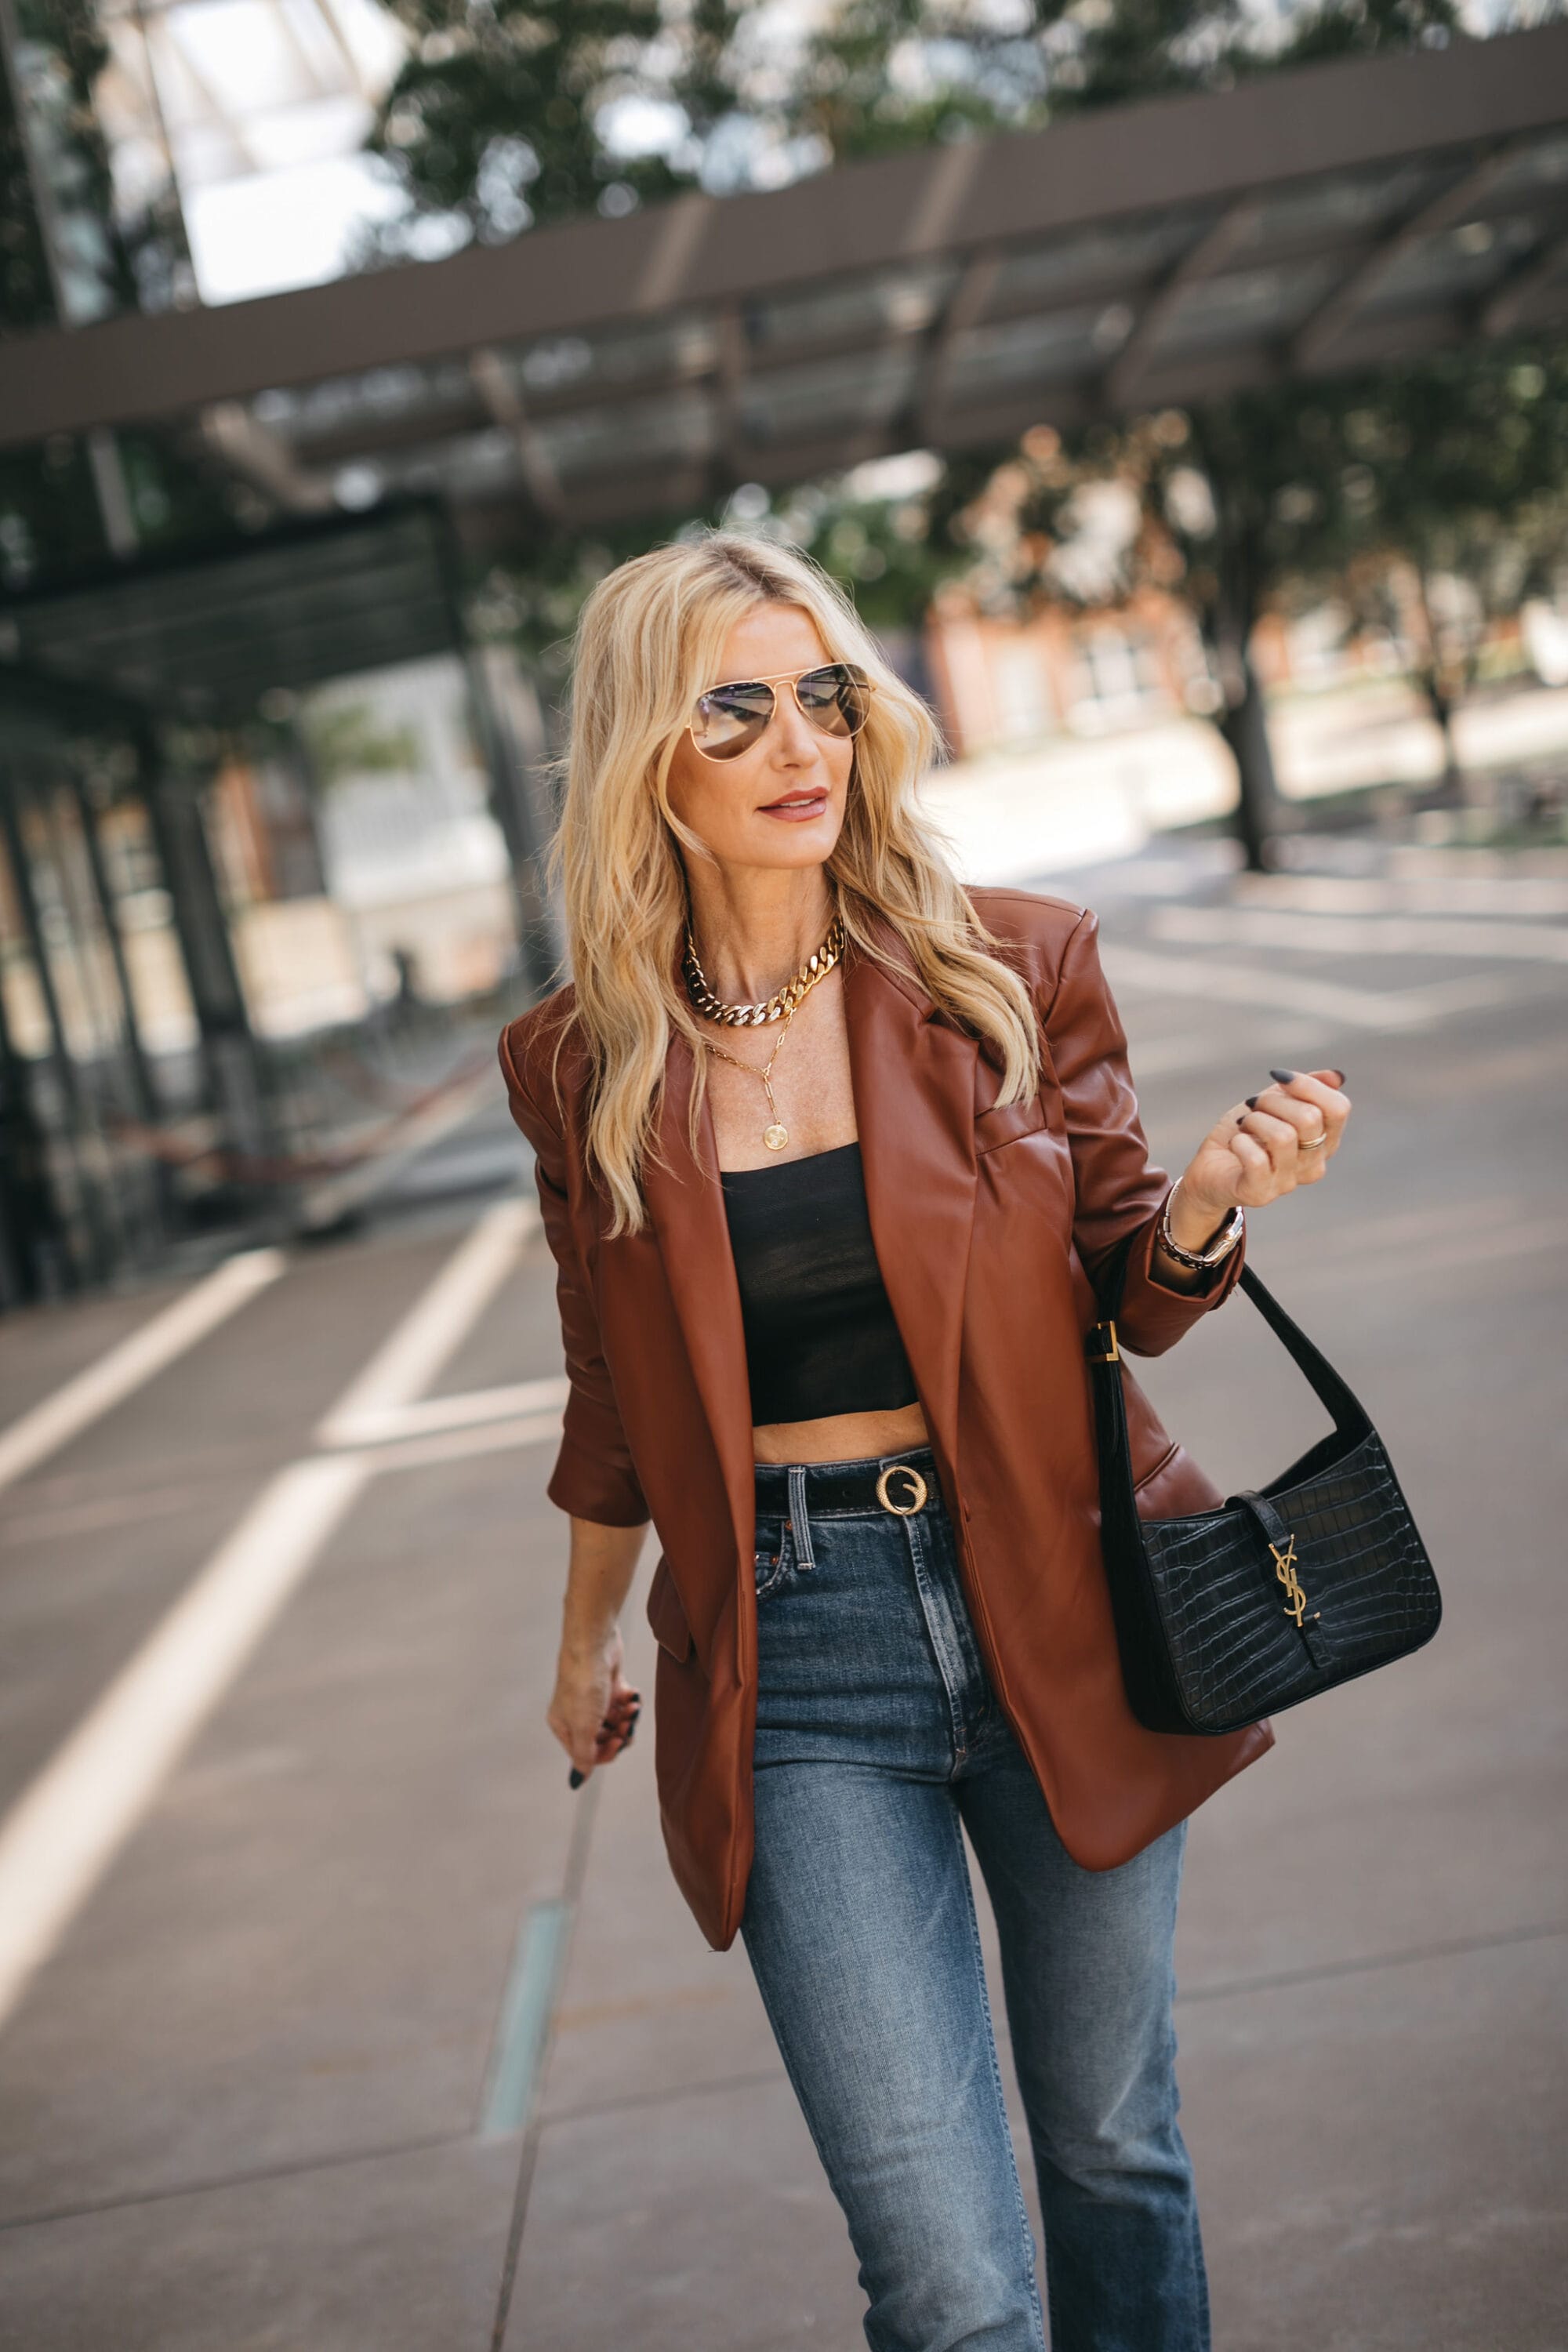 fashion influencer over 40 wearing oversize faux leather blazer, jeans and a black crop top.